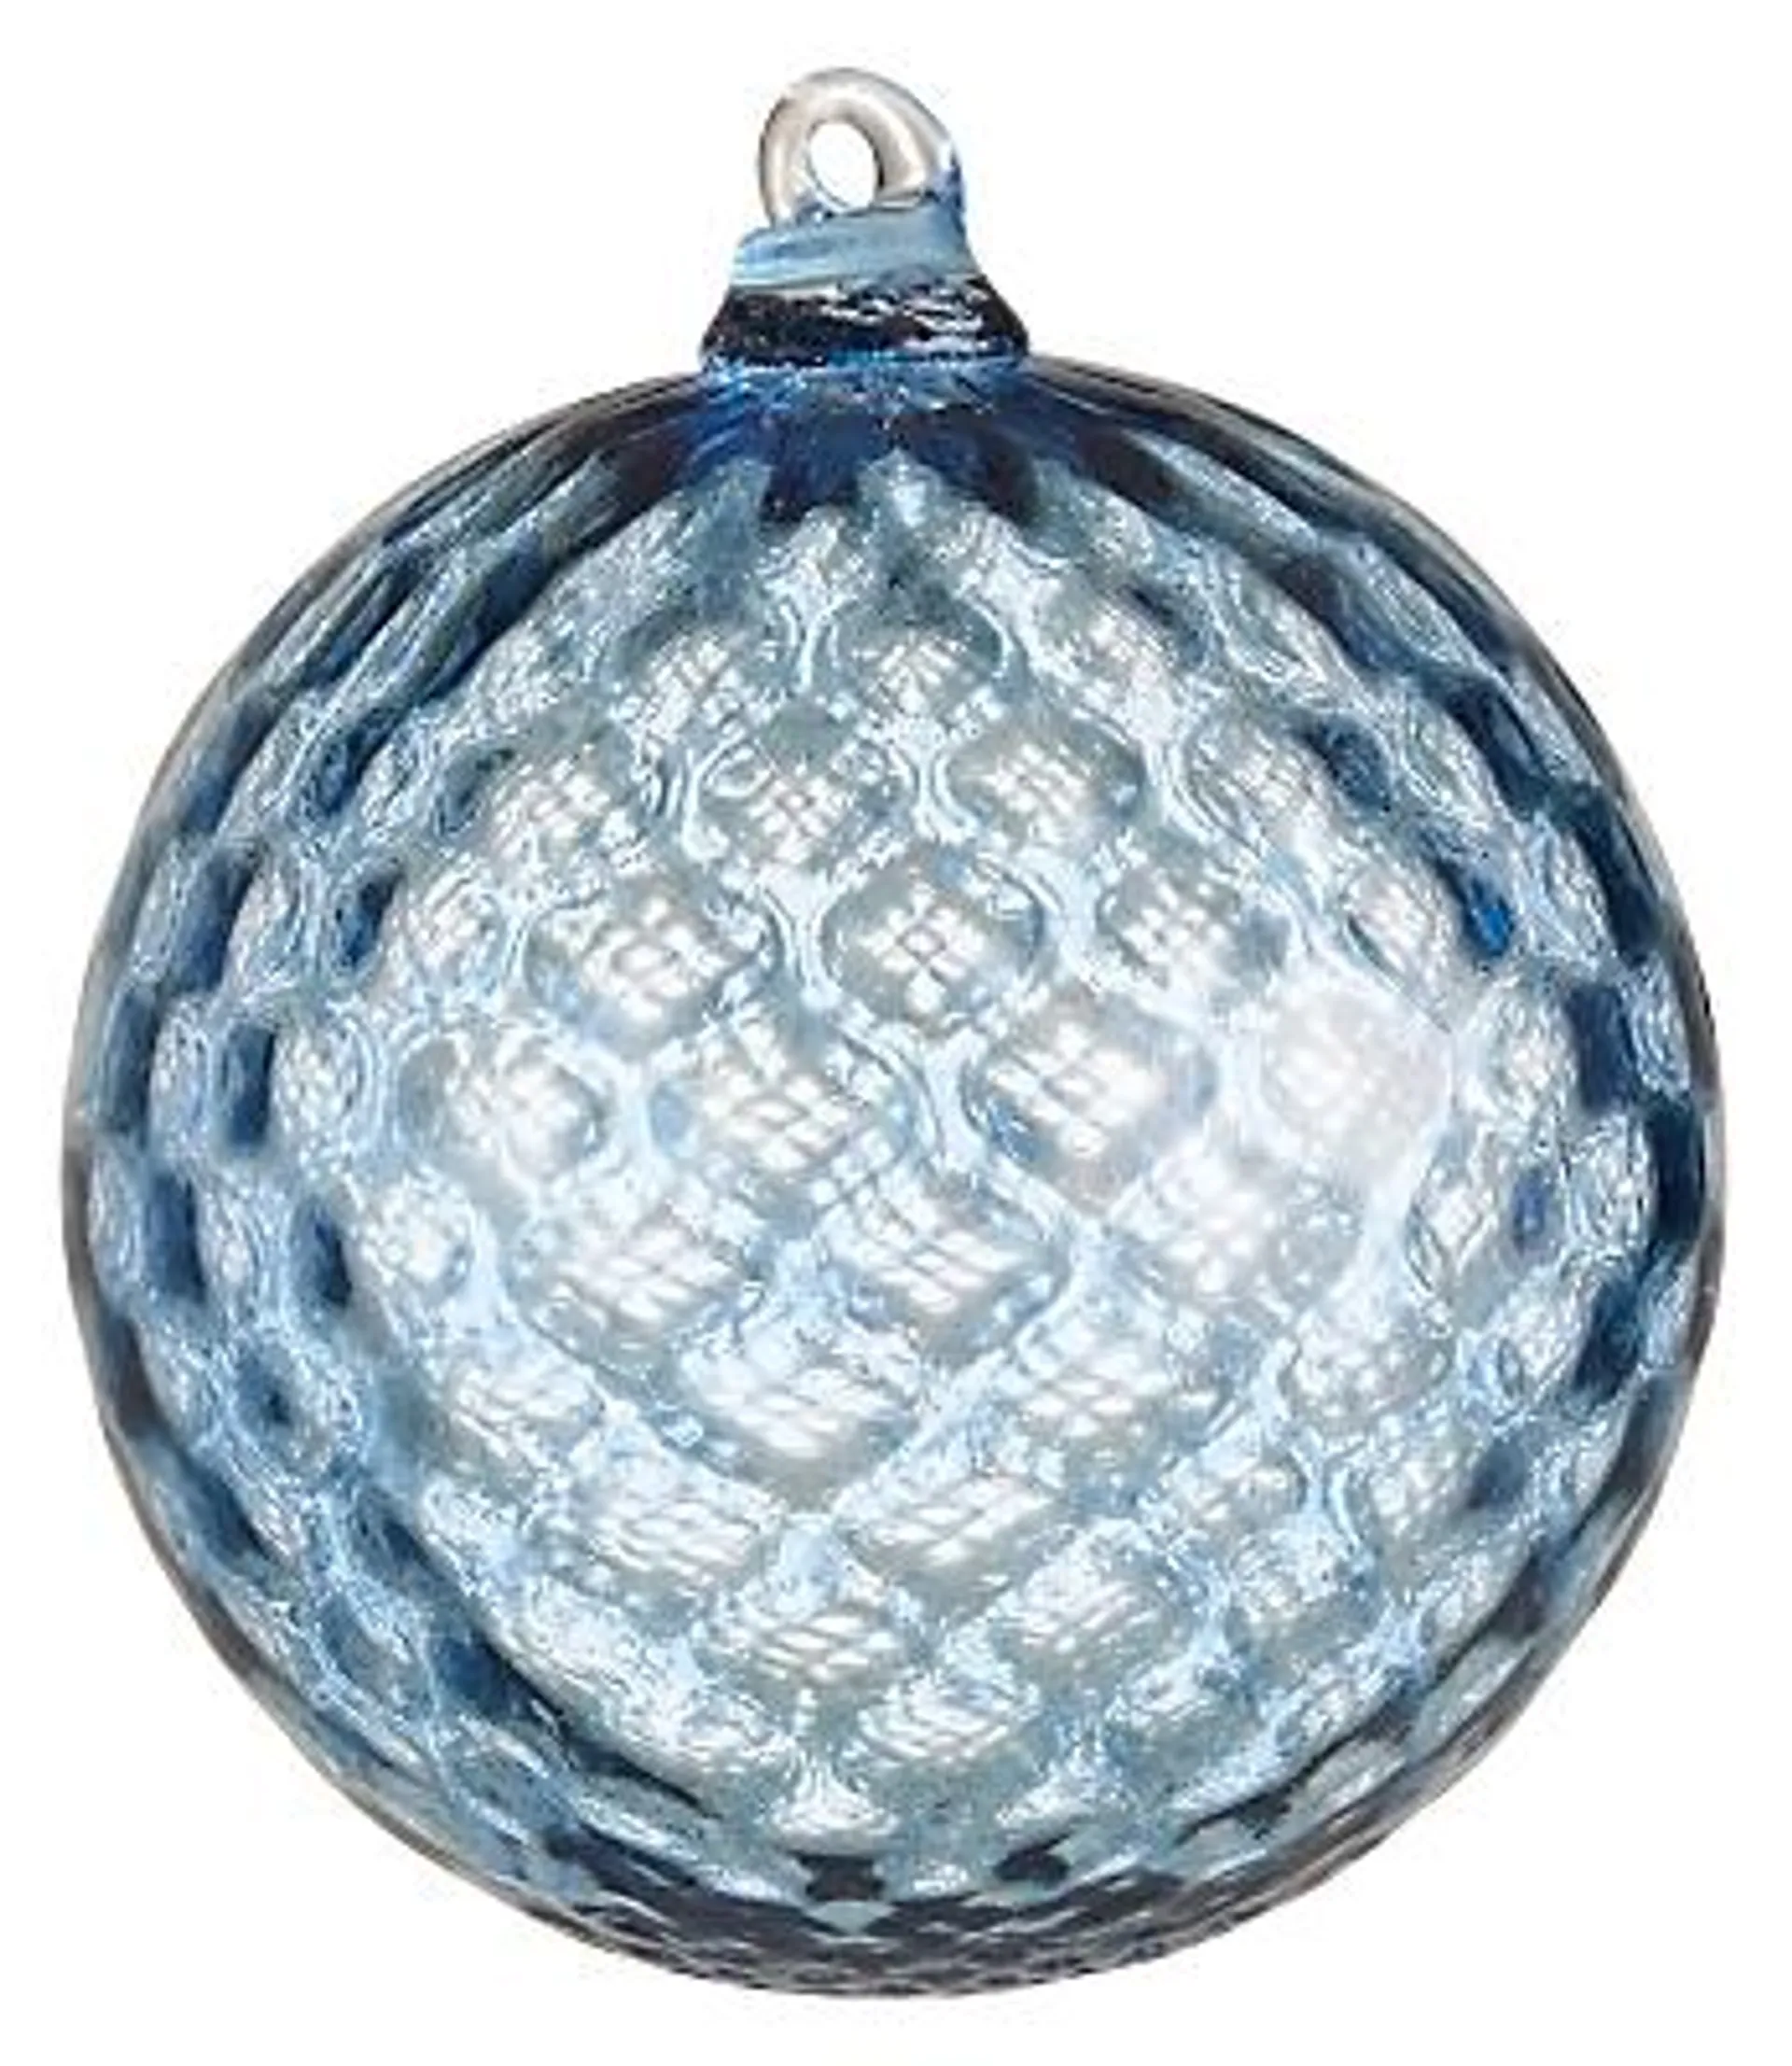 Bauble Ornament in Blue